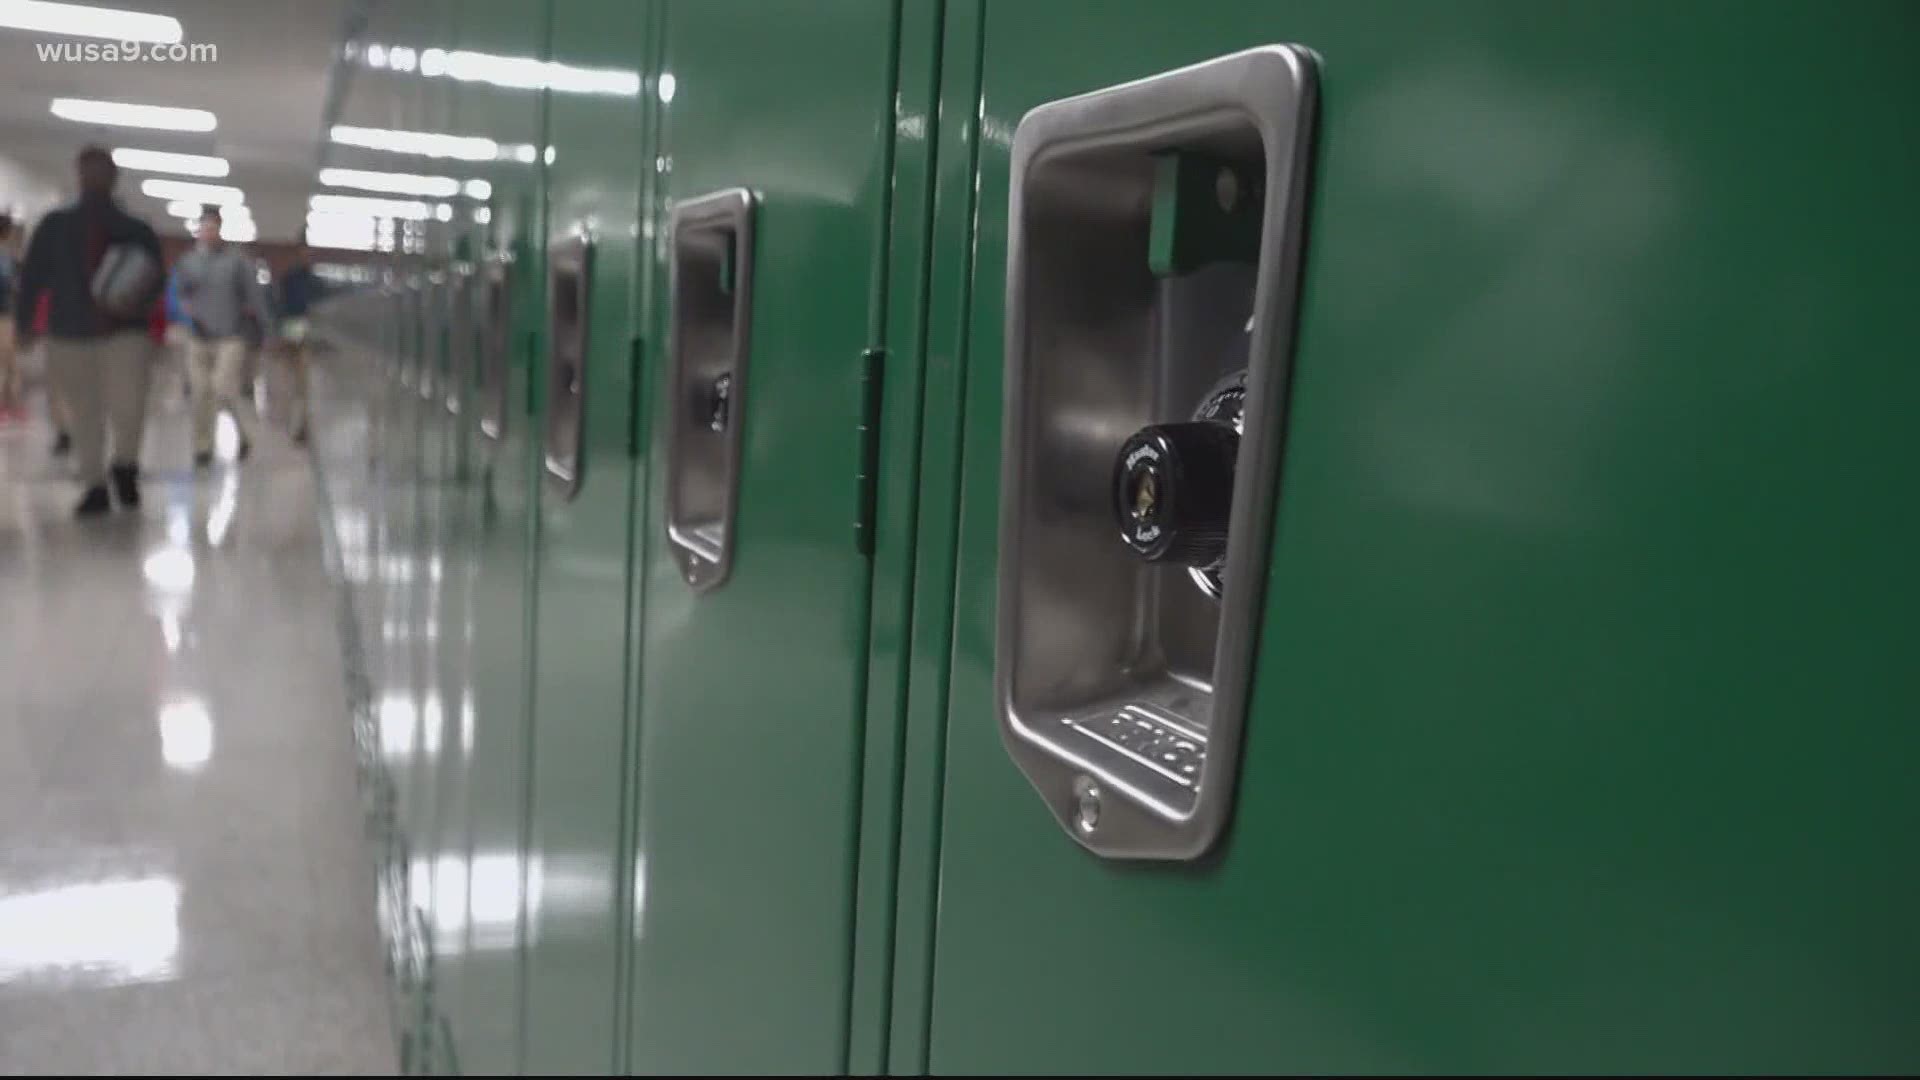 The Montgomery County Public Schools Board of Education approved a resolution Thursday that could modify or eliminate the school resource officer program.